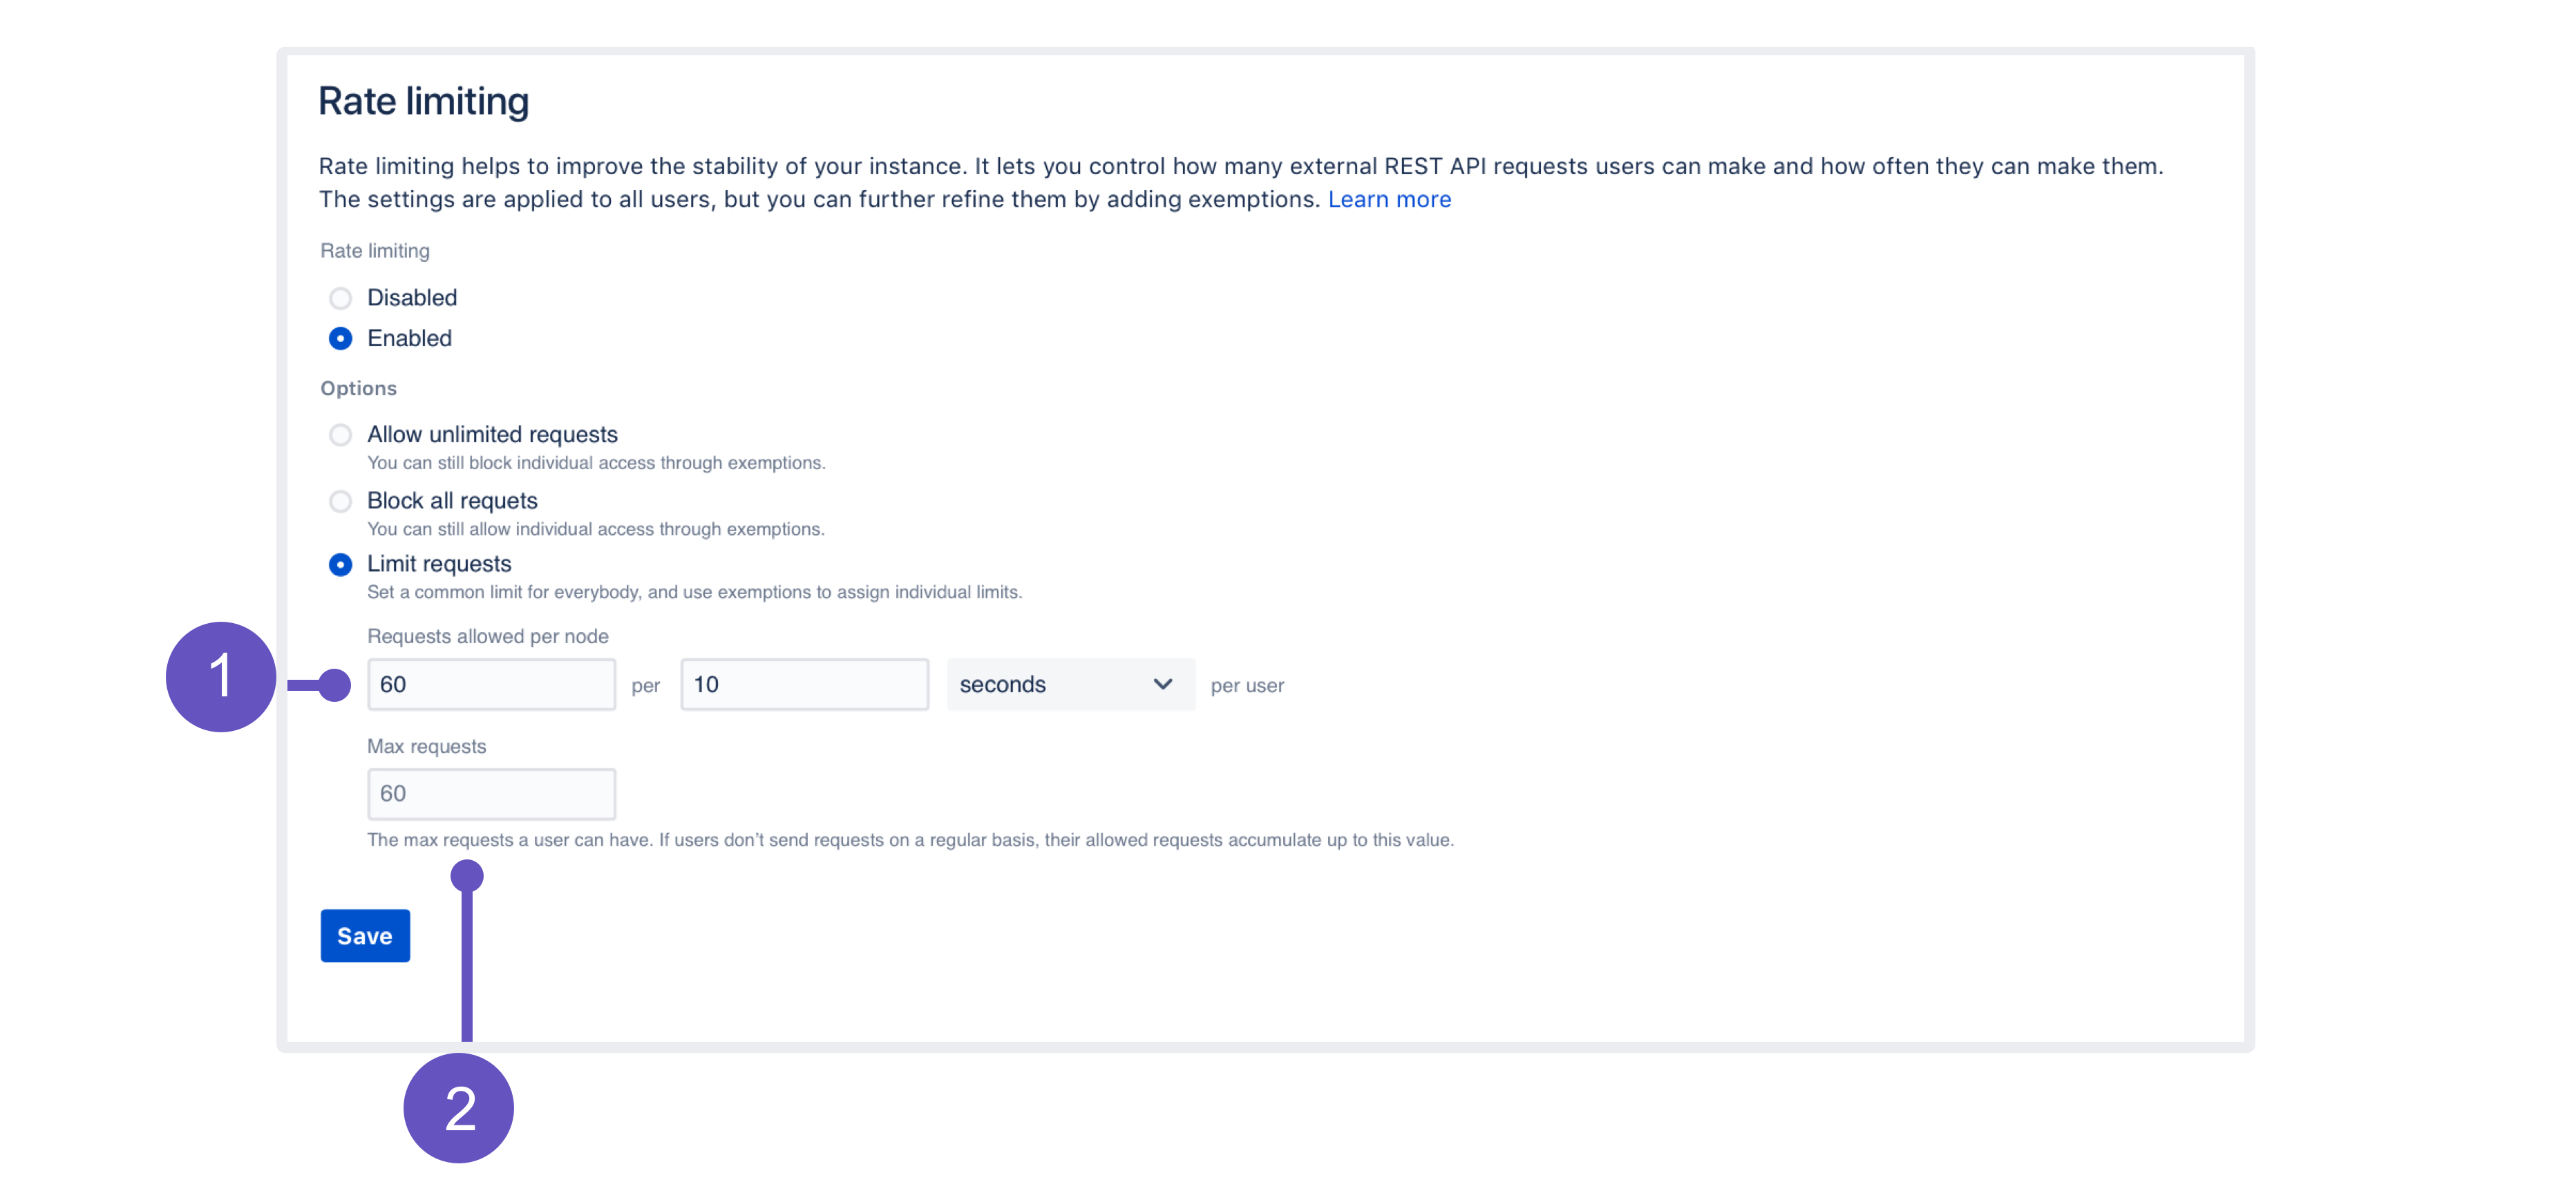 Rate limiting page in the Jira admin console, with annotations explained below the image.